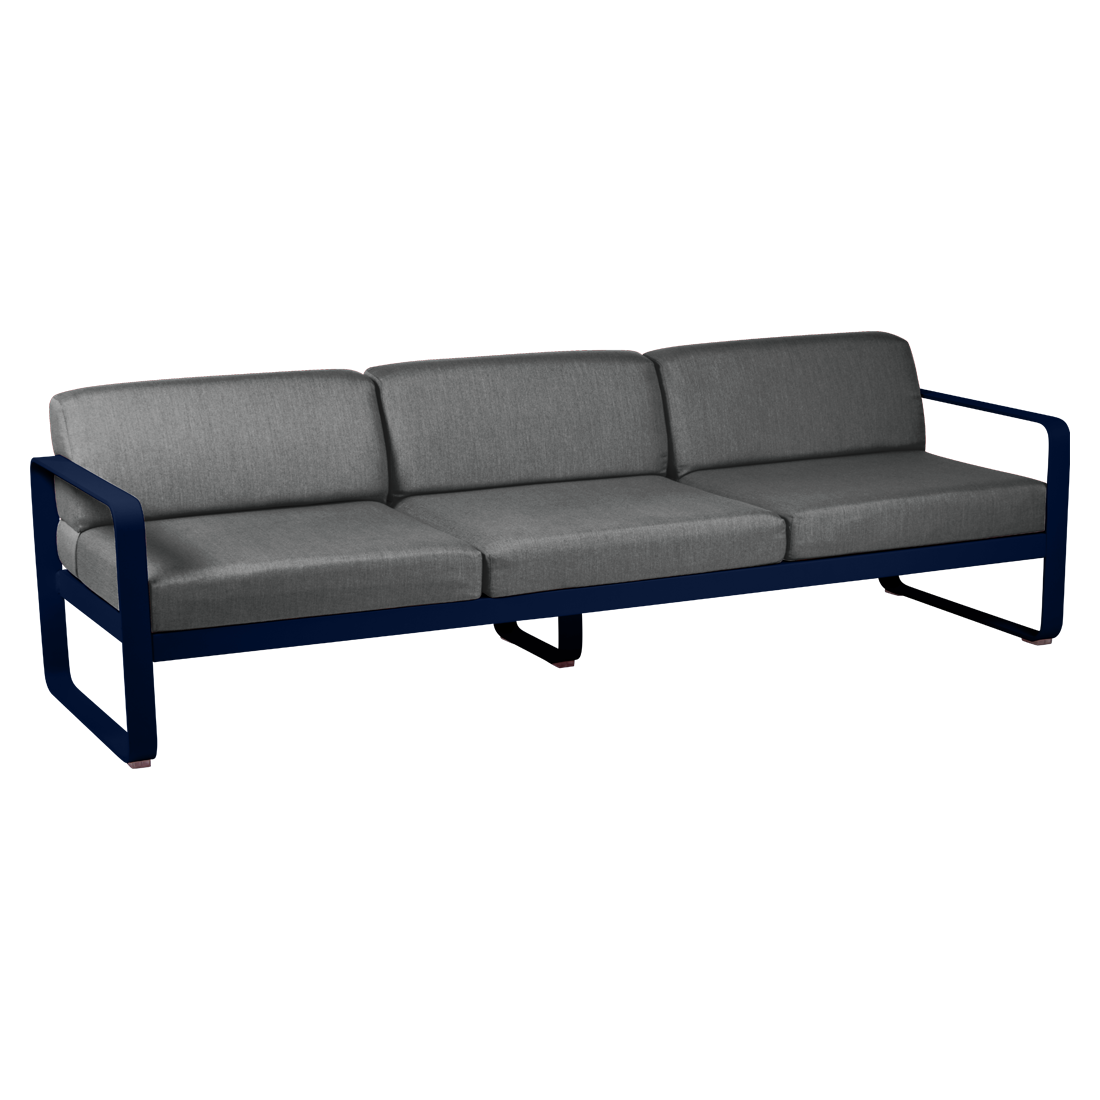 FERMOB Bellevie 3-Seater Outdoor Sofa with Graphite Cushions